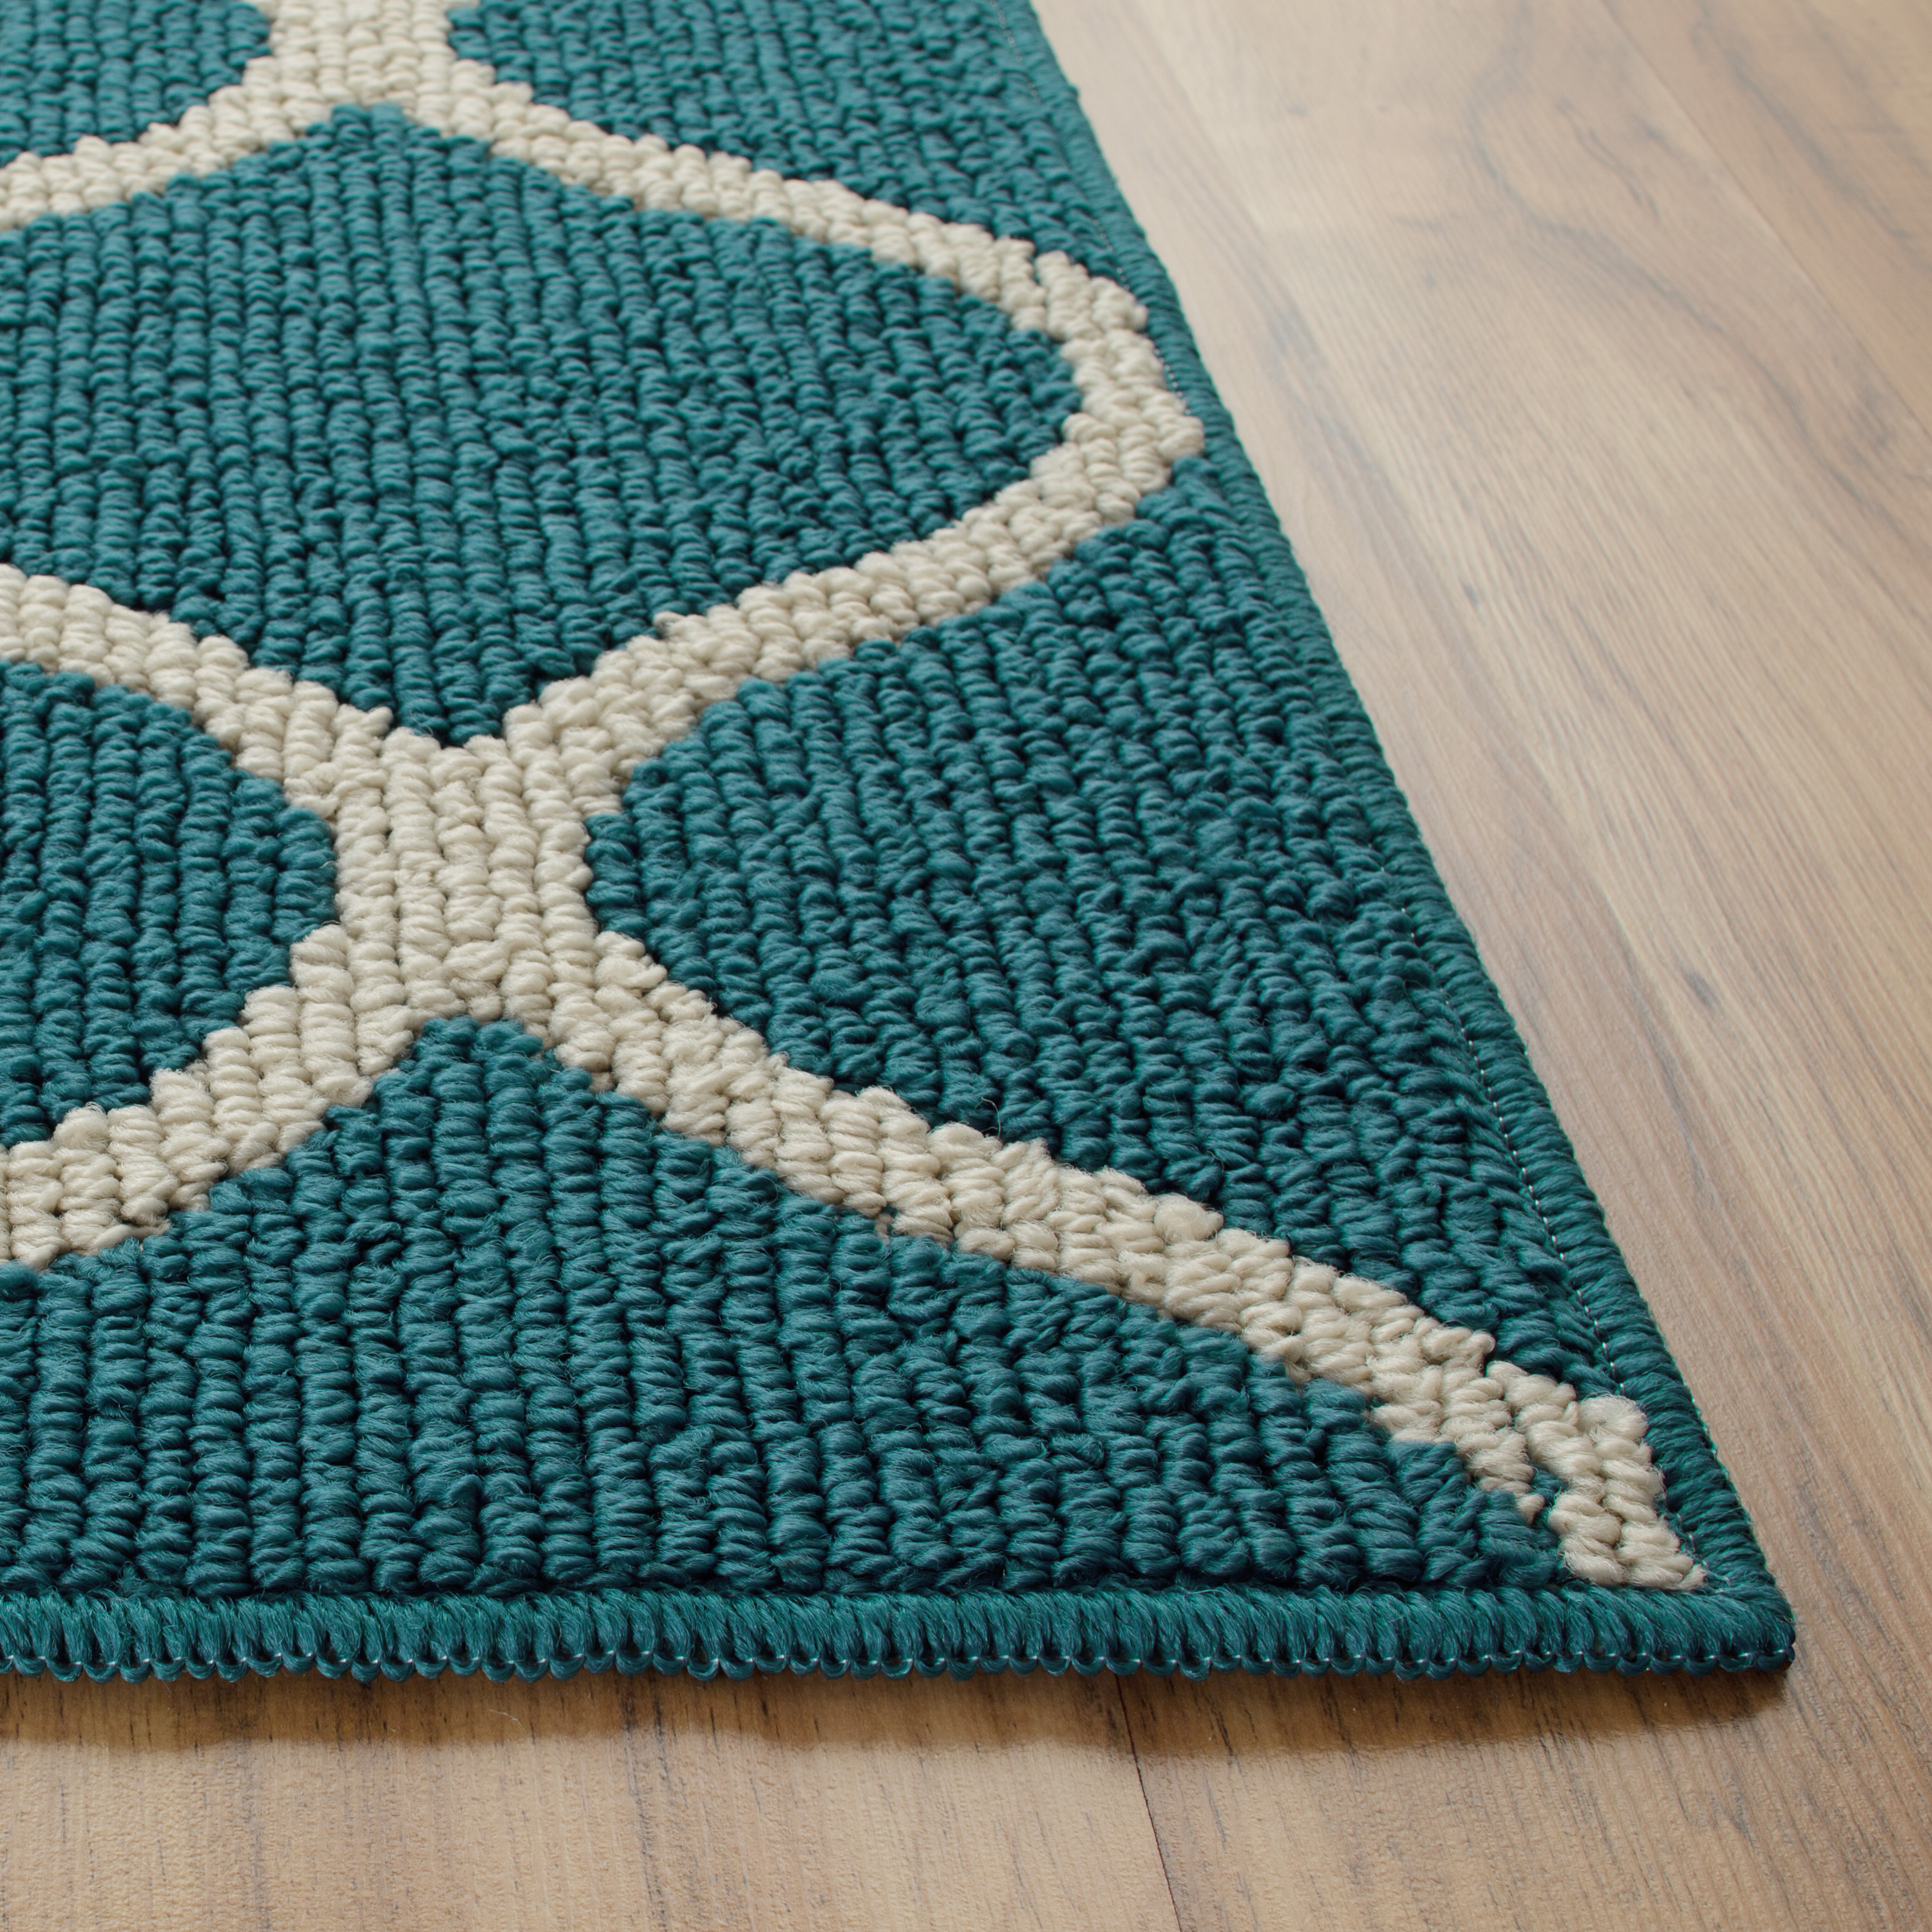 Maples Rugs Transitional Fretwork Teal Blue Living Room Indoor Area Rug, 5' x 7' - image 4 of 6